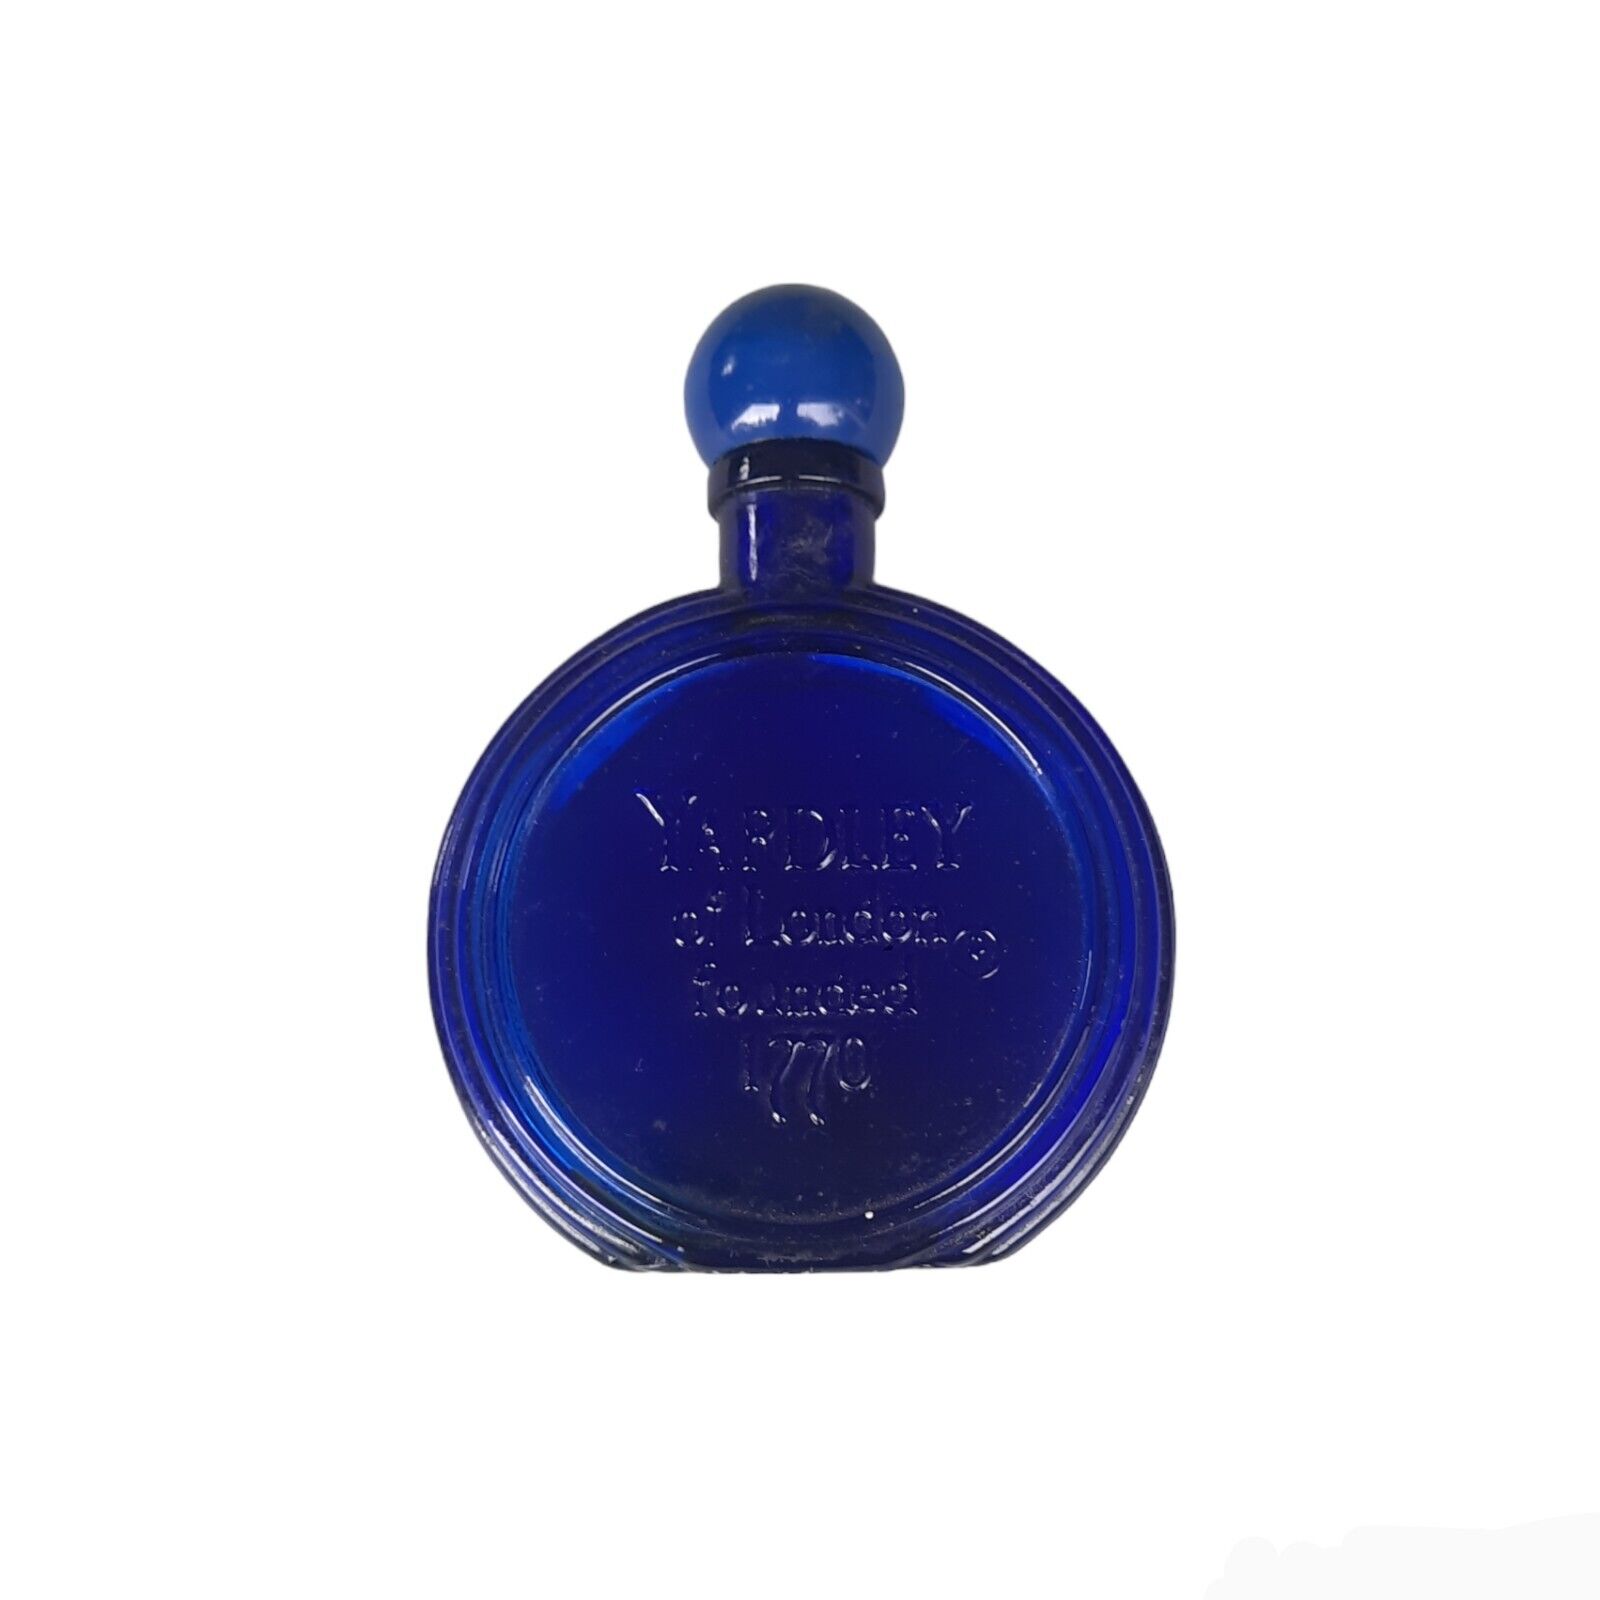 Yardley Of London Rare Blue Bottle The King\'s 1804 Dragoon Guard Cologne EMPTY